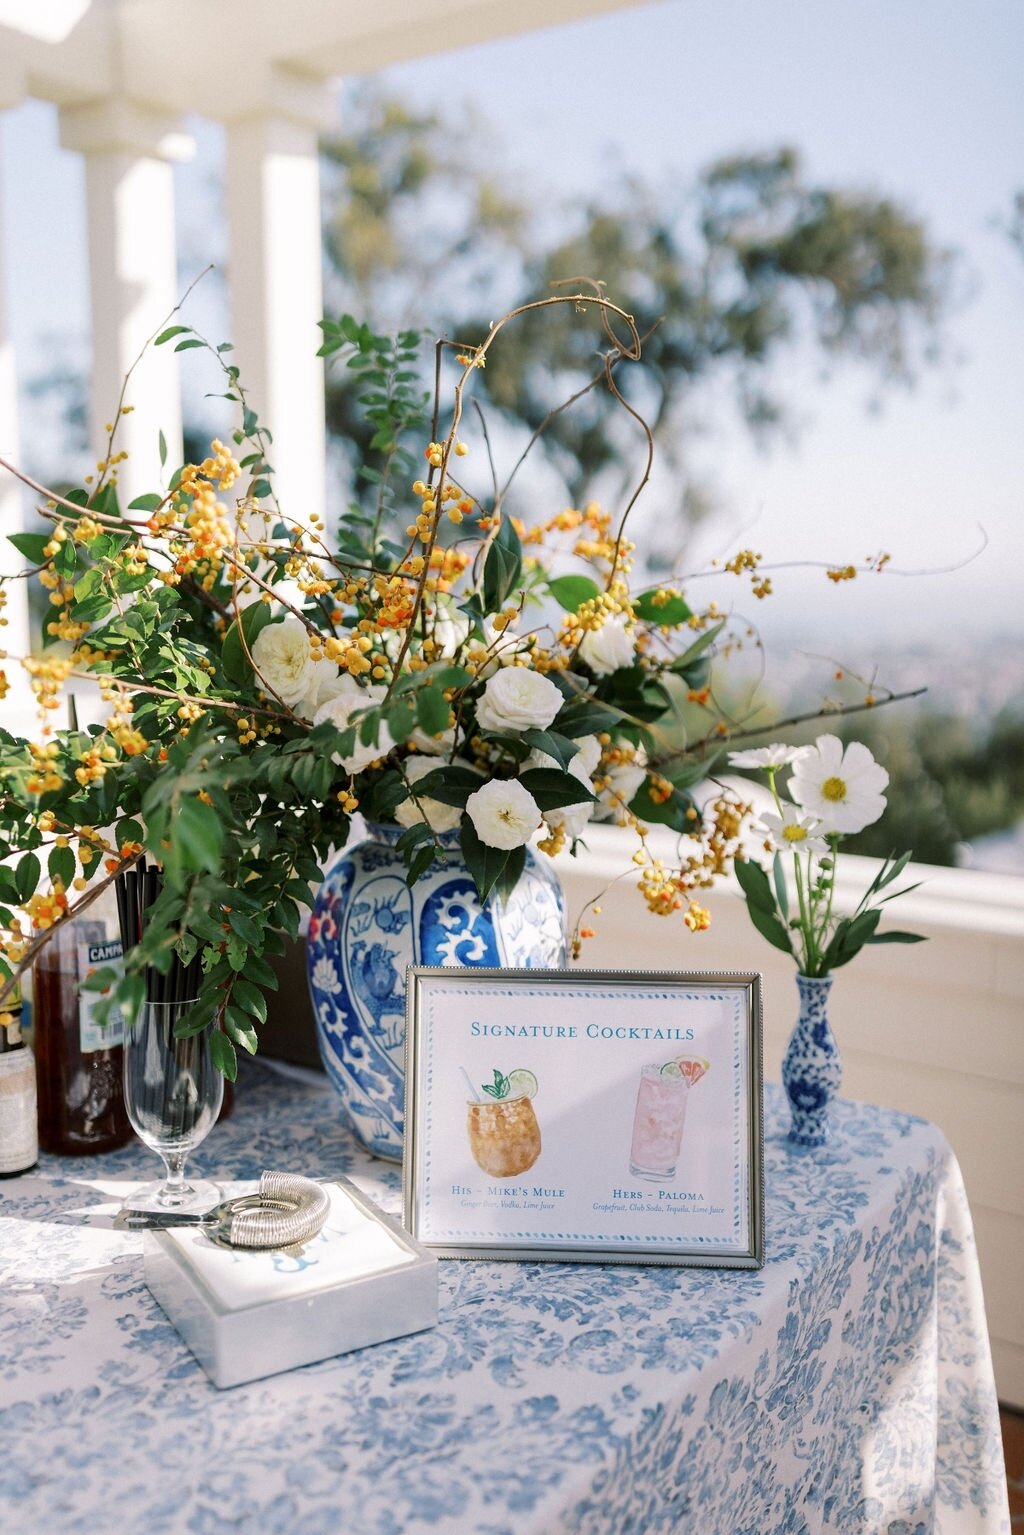 The addition of a single ingredient can change everything. Bittersweet is one of my favorites. Its wild and windy shape, its green to yellow to orange berries. .
.
.
.
.
#brightfloral #brightfloraldesign #santabarbarawedding #santabarbaraflorist #san